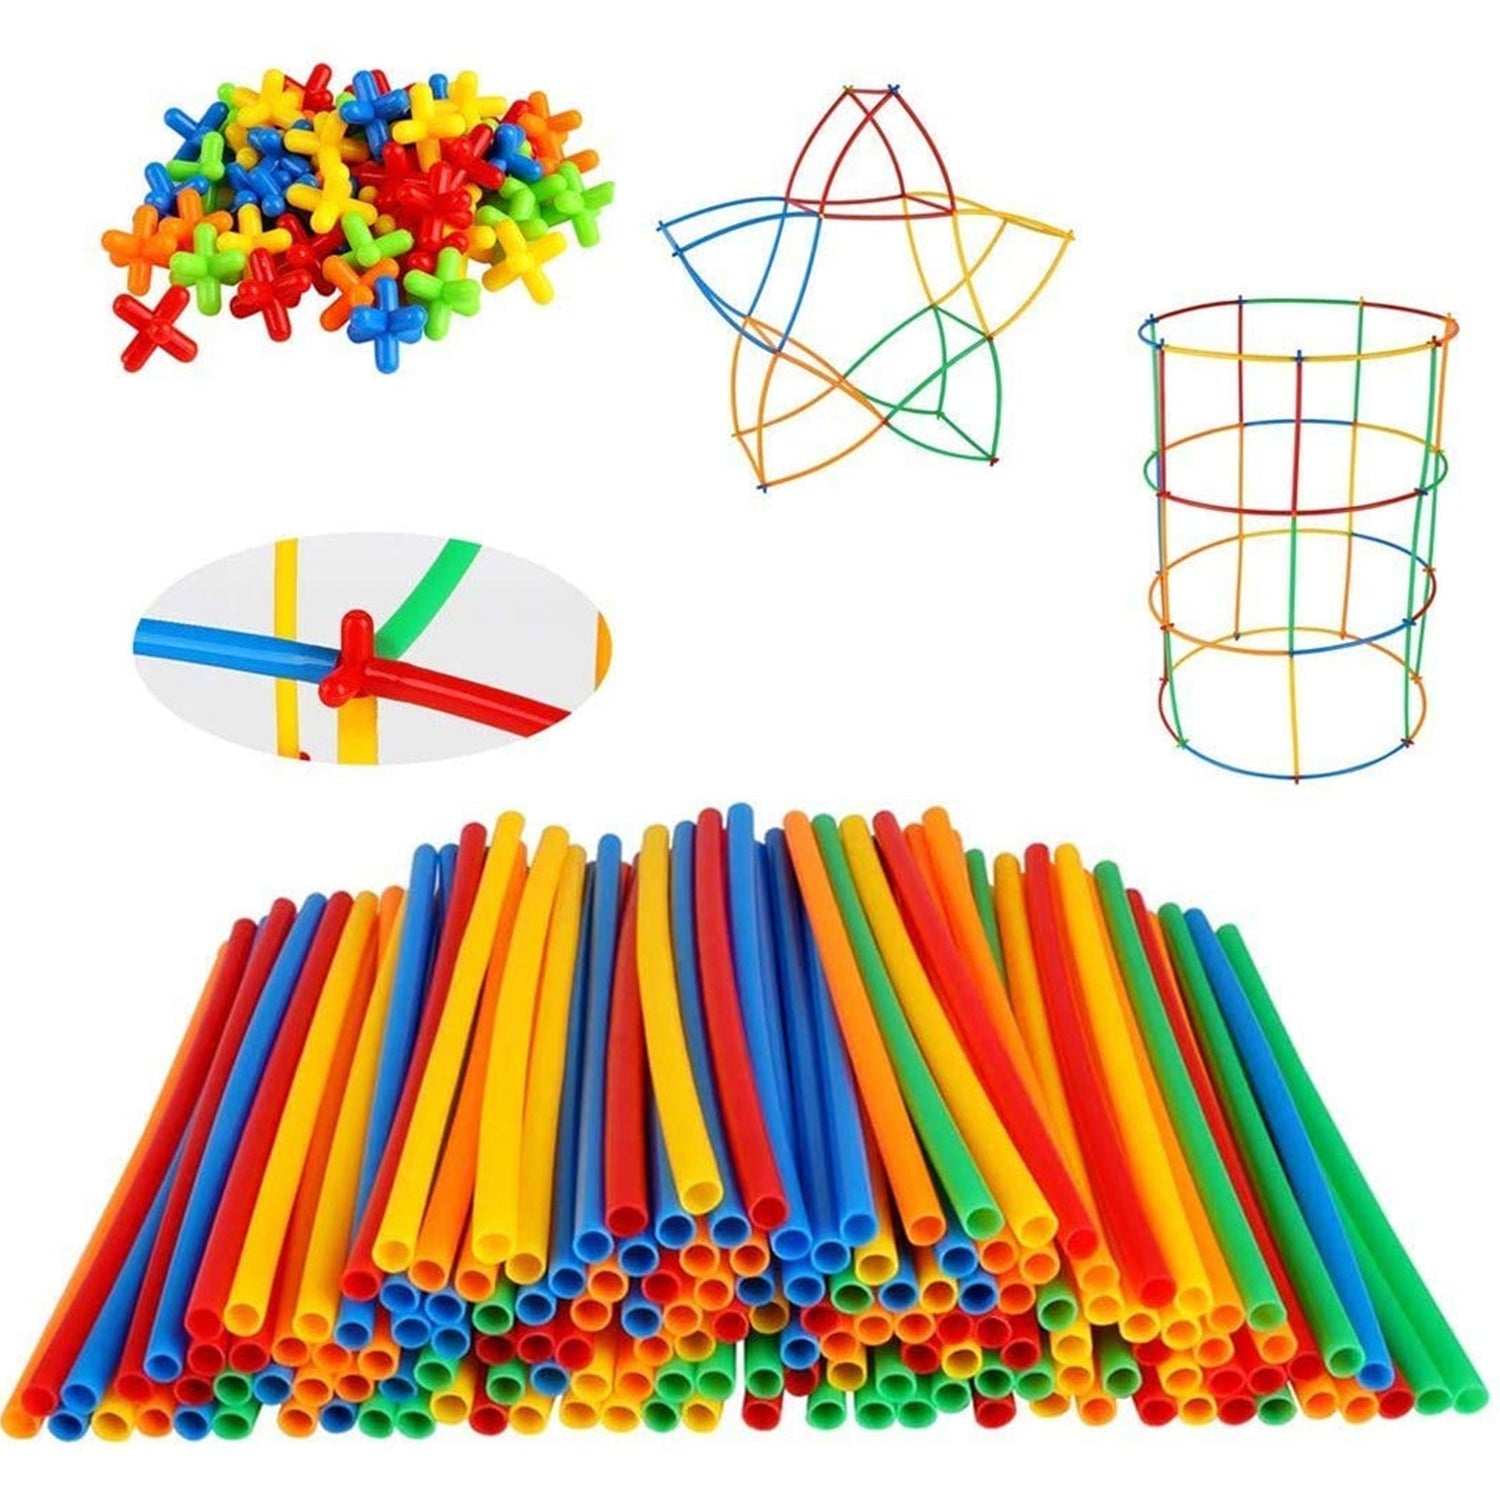 3917 100 Pc 4 D Block Toy used in all kinds of household and official places specially for kids and children for their playing and enjoying purposes. 